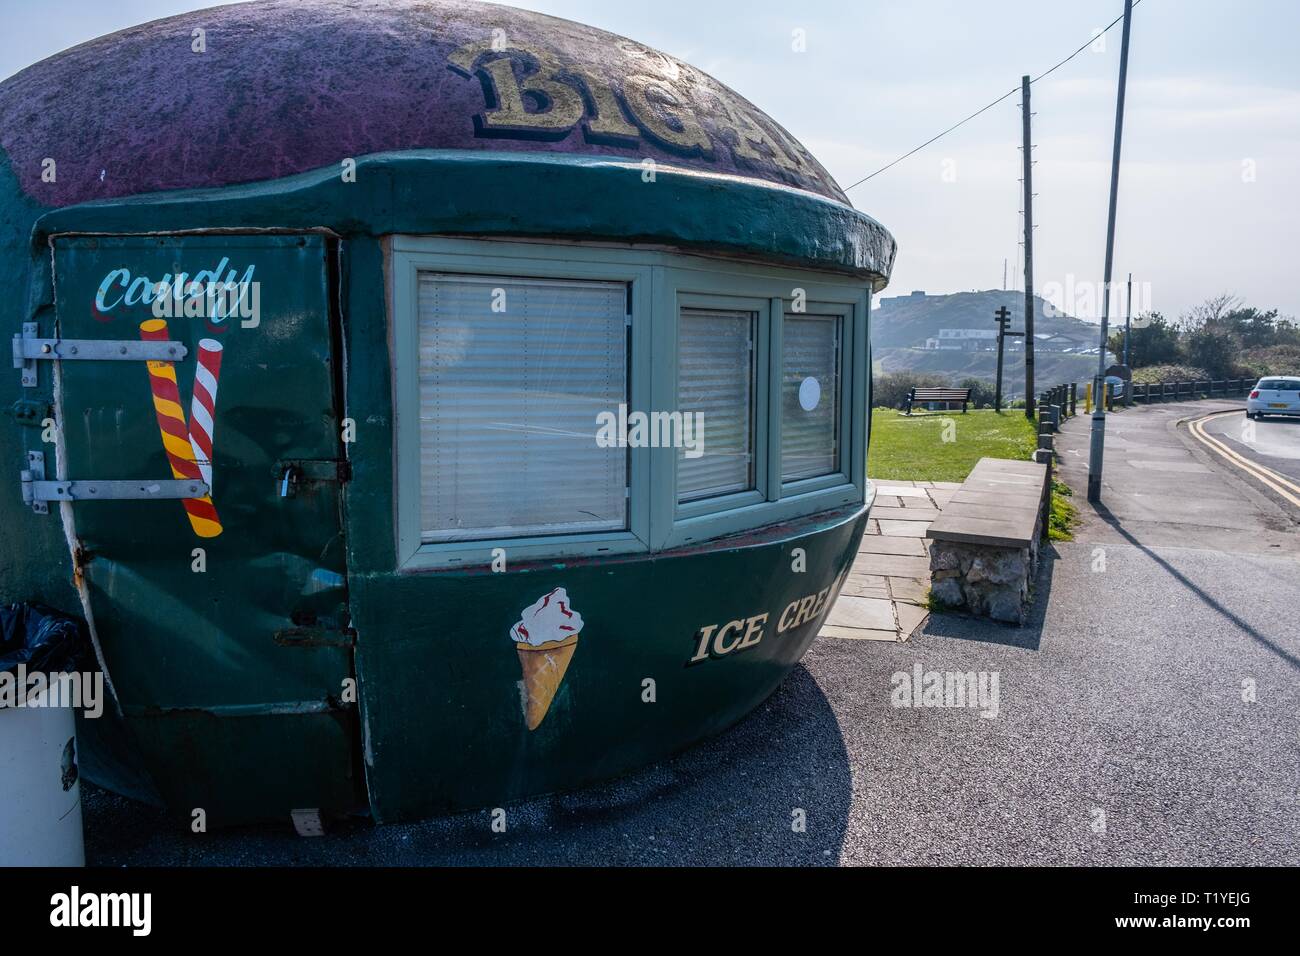 Swansea, Wales. 29th Mar, 2019. UK Weather: Flavour of the month: a seaside icecream kiosk at Bracelet Bay, near Mumbles, Swansea, has been given listed status. The spherical concrete structure, called The Big Apple, dates back to the 1930's and is a well known Swansea landmark. The unique structure was granted the special staus by Cadw, the Welsh Assembly Government's body. Credit: Gareth LLewelyn/Alamy Live News Stock Photo